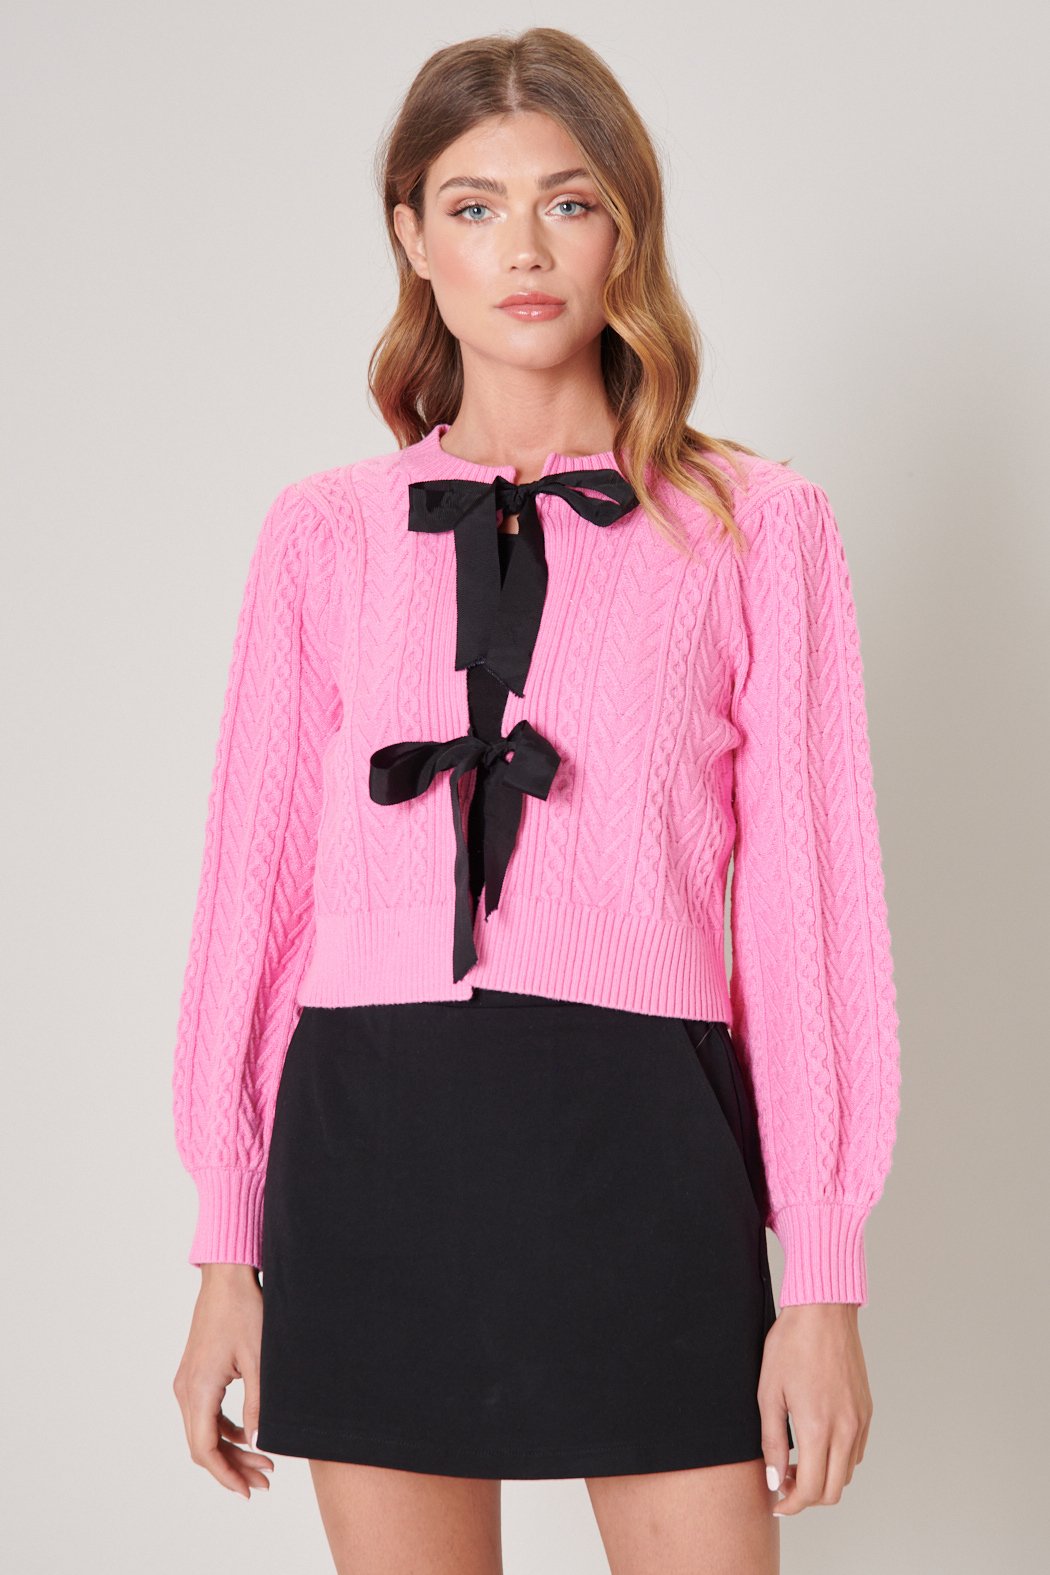 Pinky Promise Bow Tie Cardigan